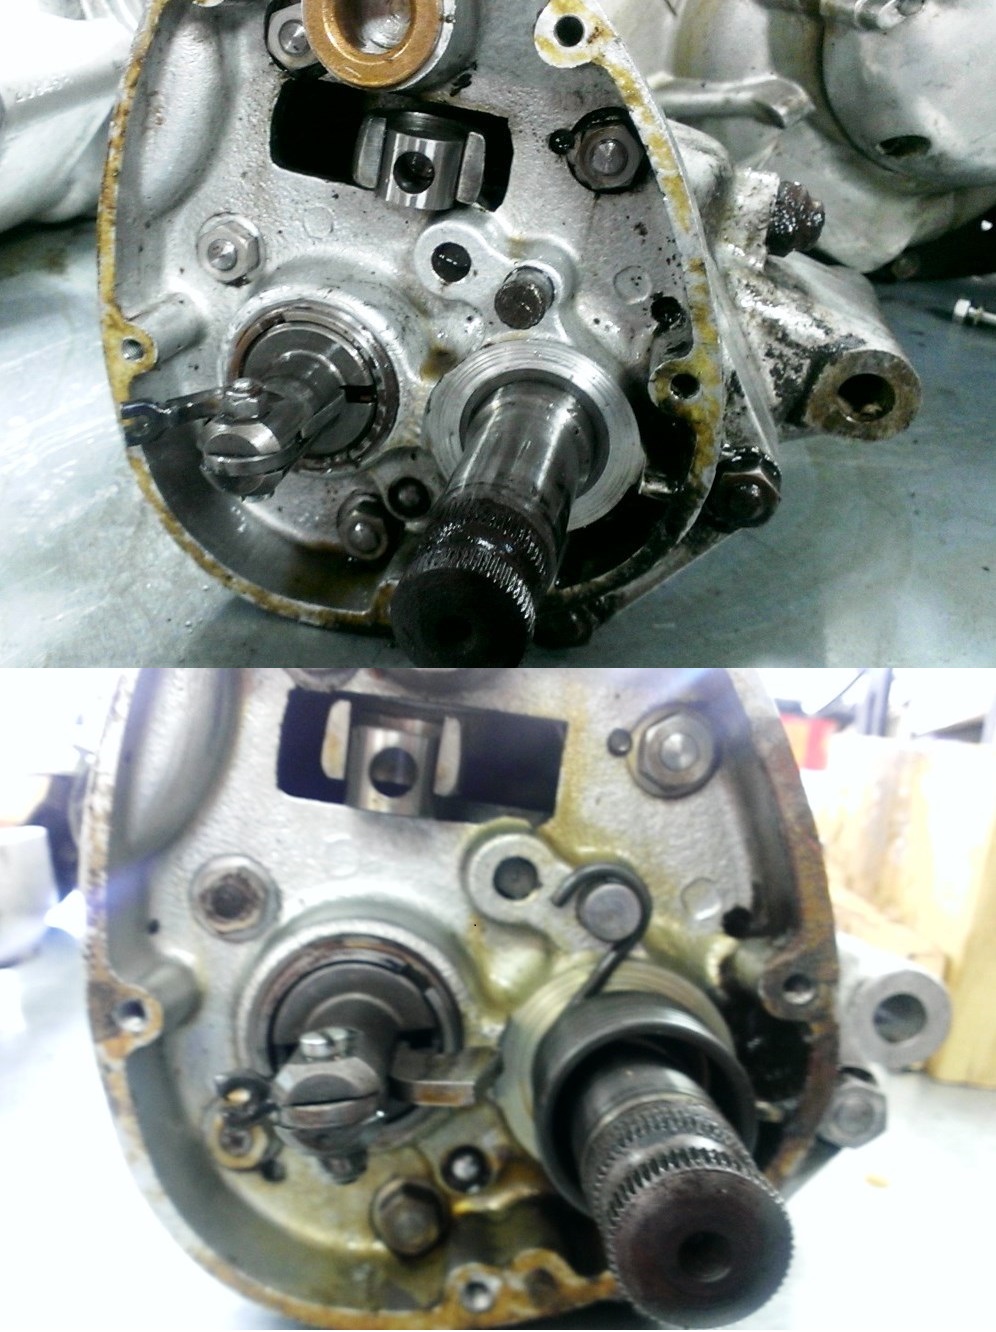 Gearboxes apart